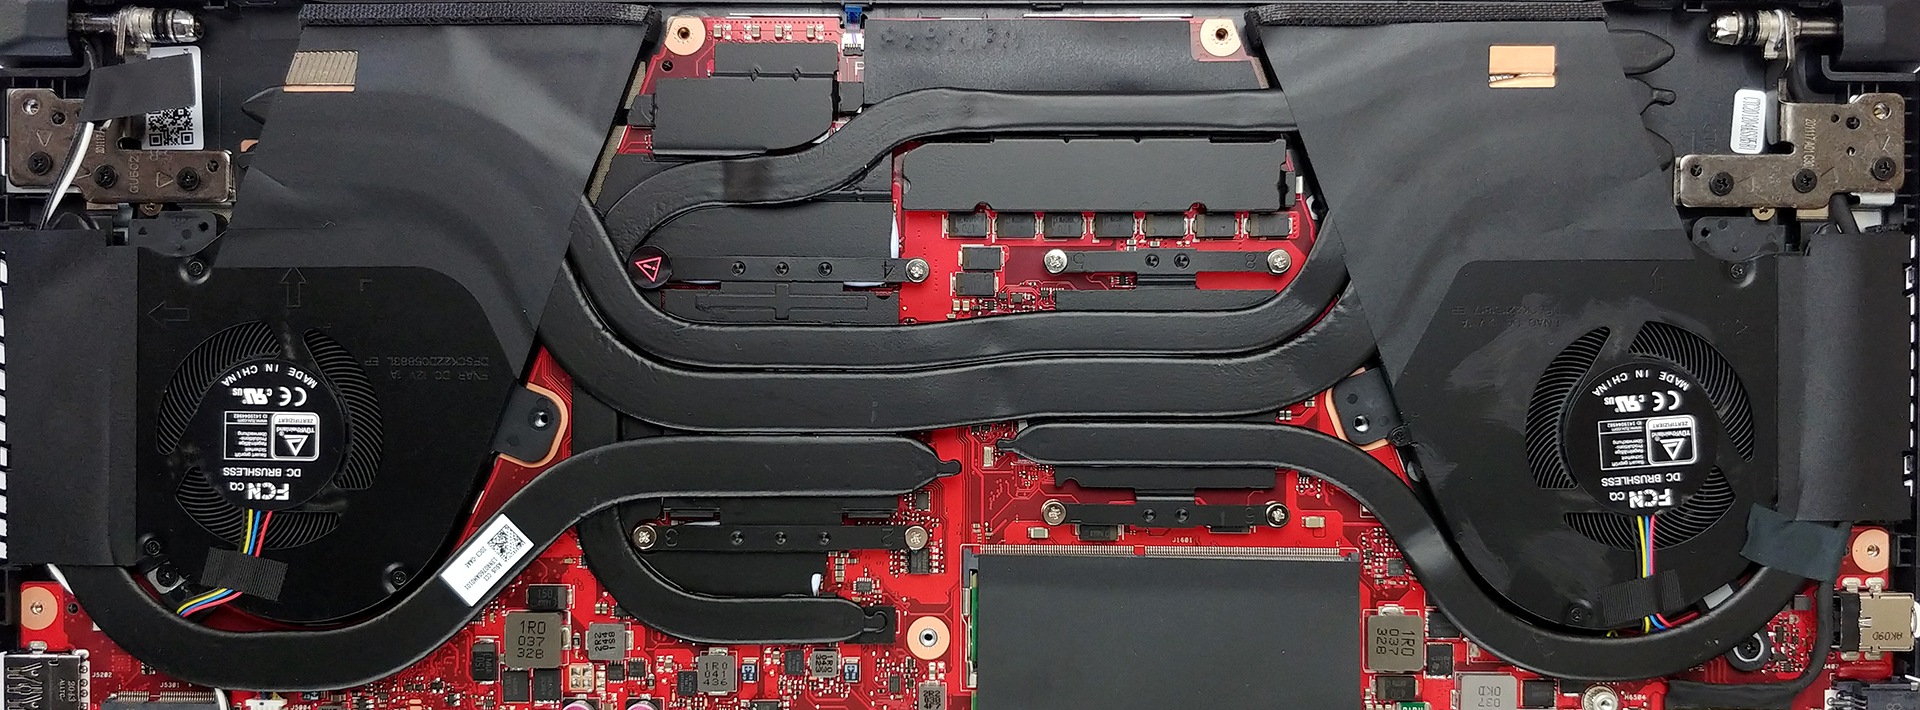 Inside ASUS TUF Dash F15 (FX516) - disassembly and upgrade options |  LaptopMedia India